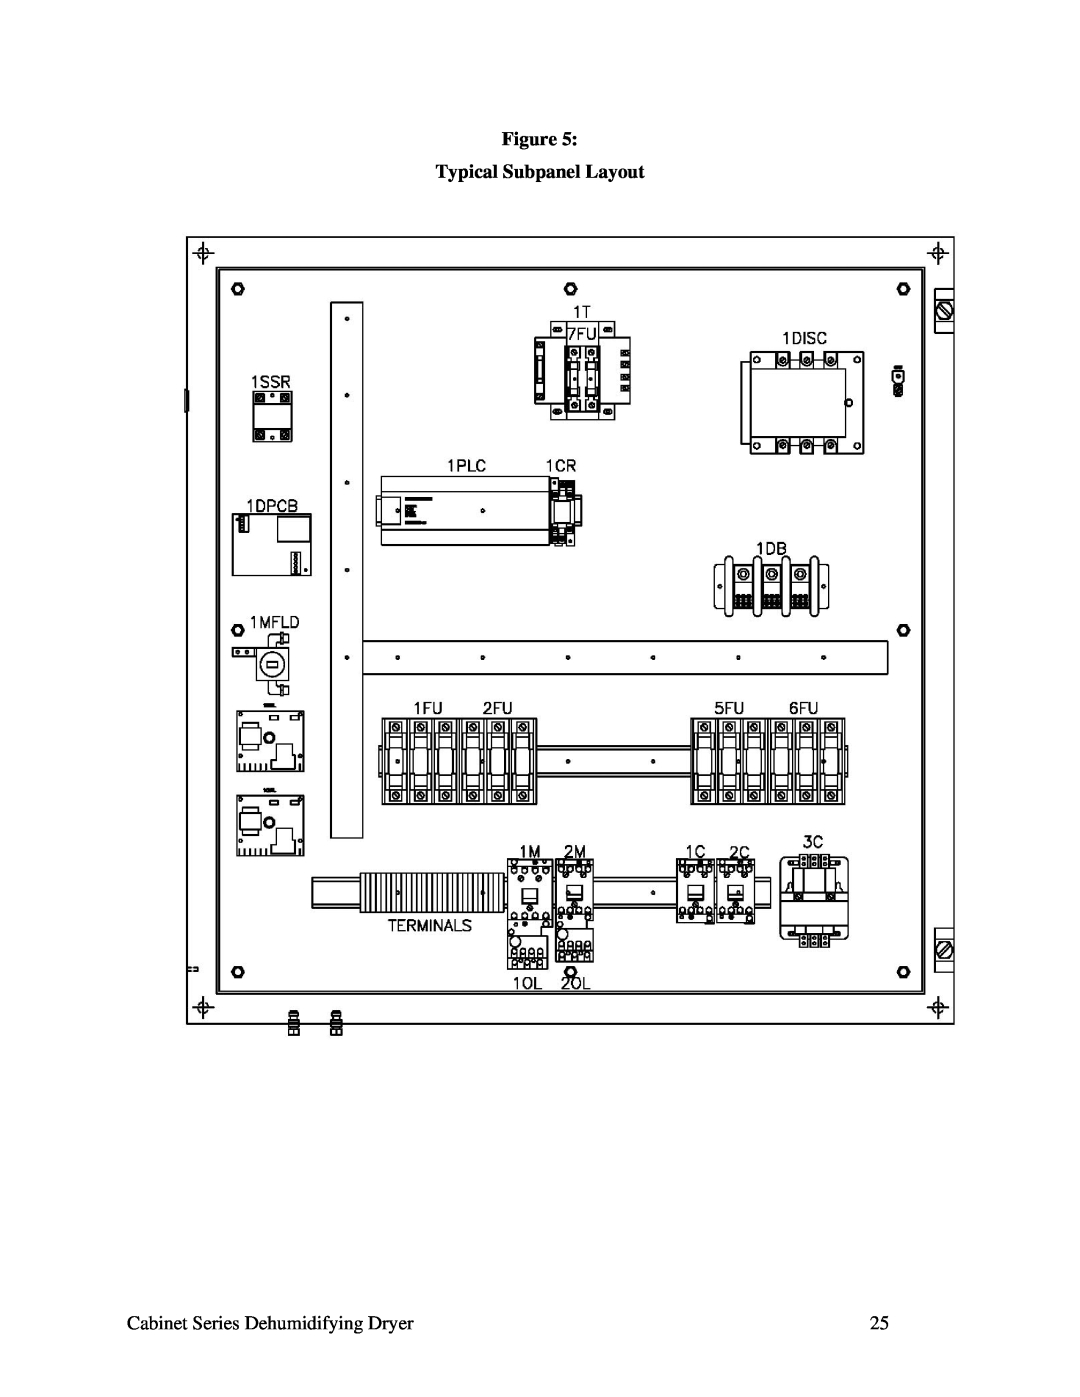 Sterling Plumbing 225, 90, 150, 100 installation manual Figure Typical Subpanel Layout, Cabinet Series Dehumidifying Dryer 